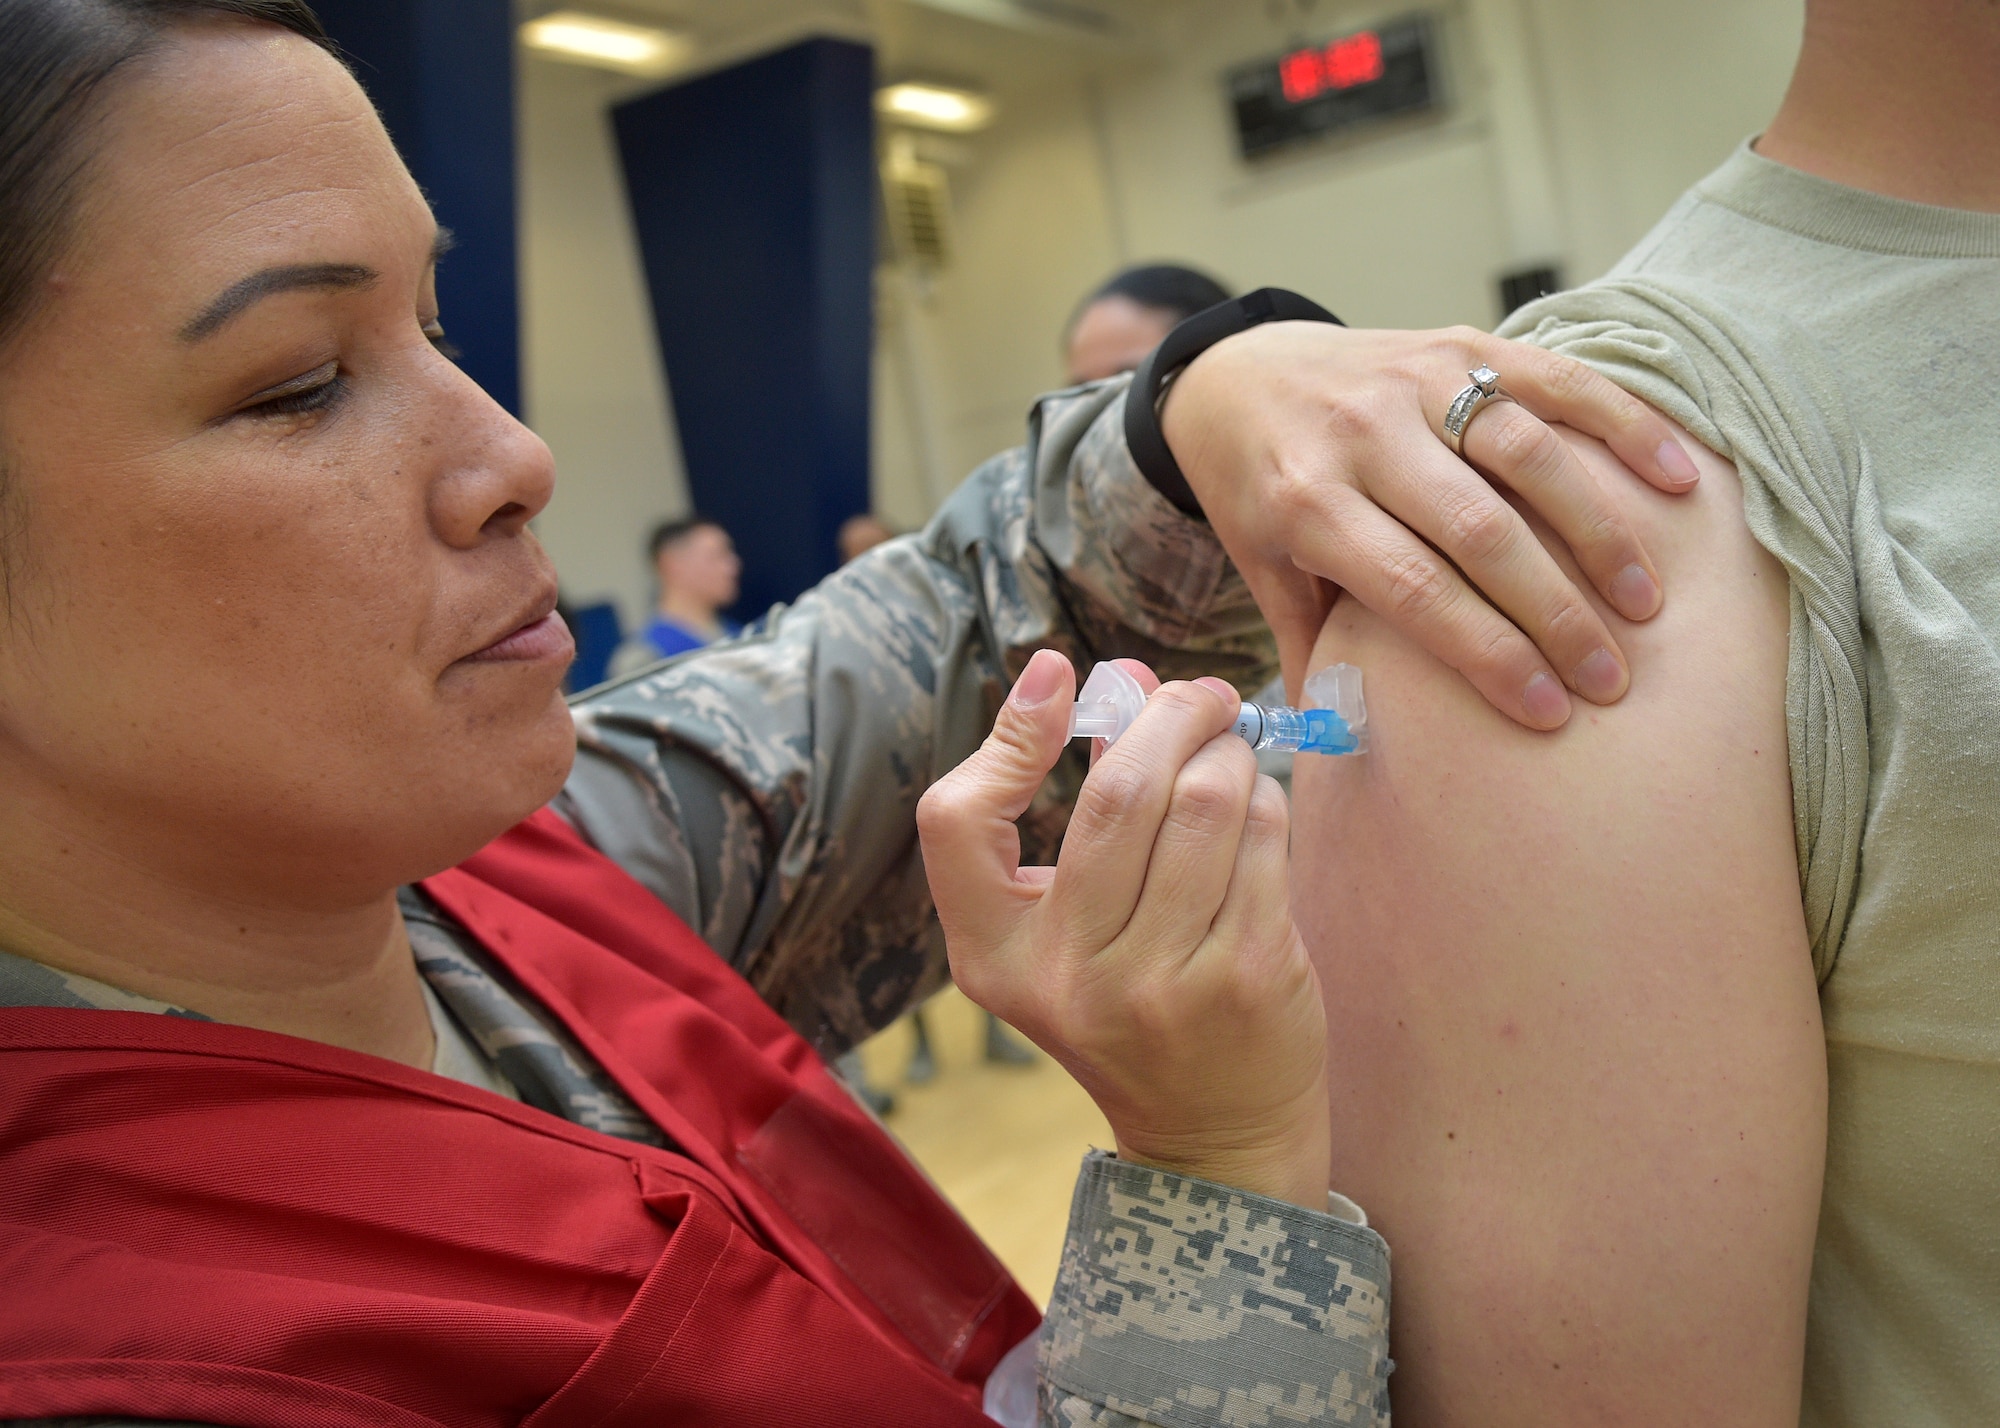 U.S. Air Force Senior Master Sgt. Chi Swanson, the 35th Medical Operations Squadron superintendent, administers a flu vaccine during a point of distribution, at Misawa Air Base, Japan, Nov. 3, 2016. The flu POD showcased the 35th Medical Group’s capability to immunize a large amount of people quickly and to learn their roles during a real-world epidemic. (U.S. Air Force photo by Senior Airman Deana Heitzman)